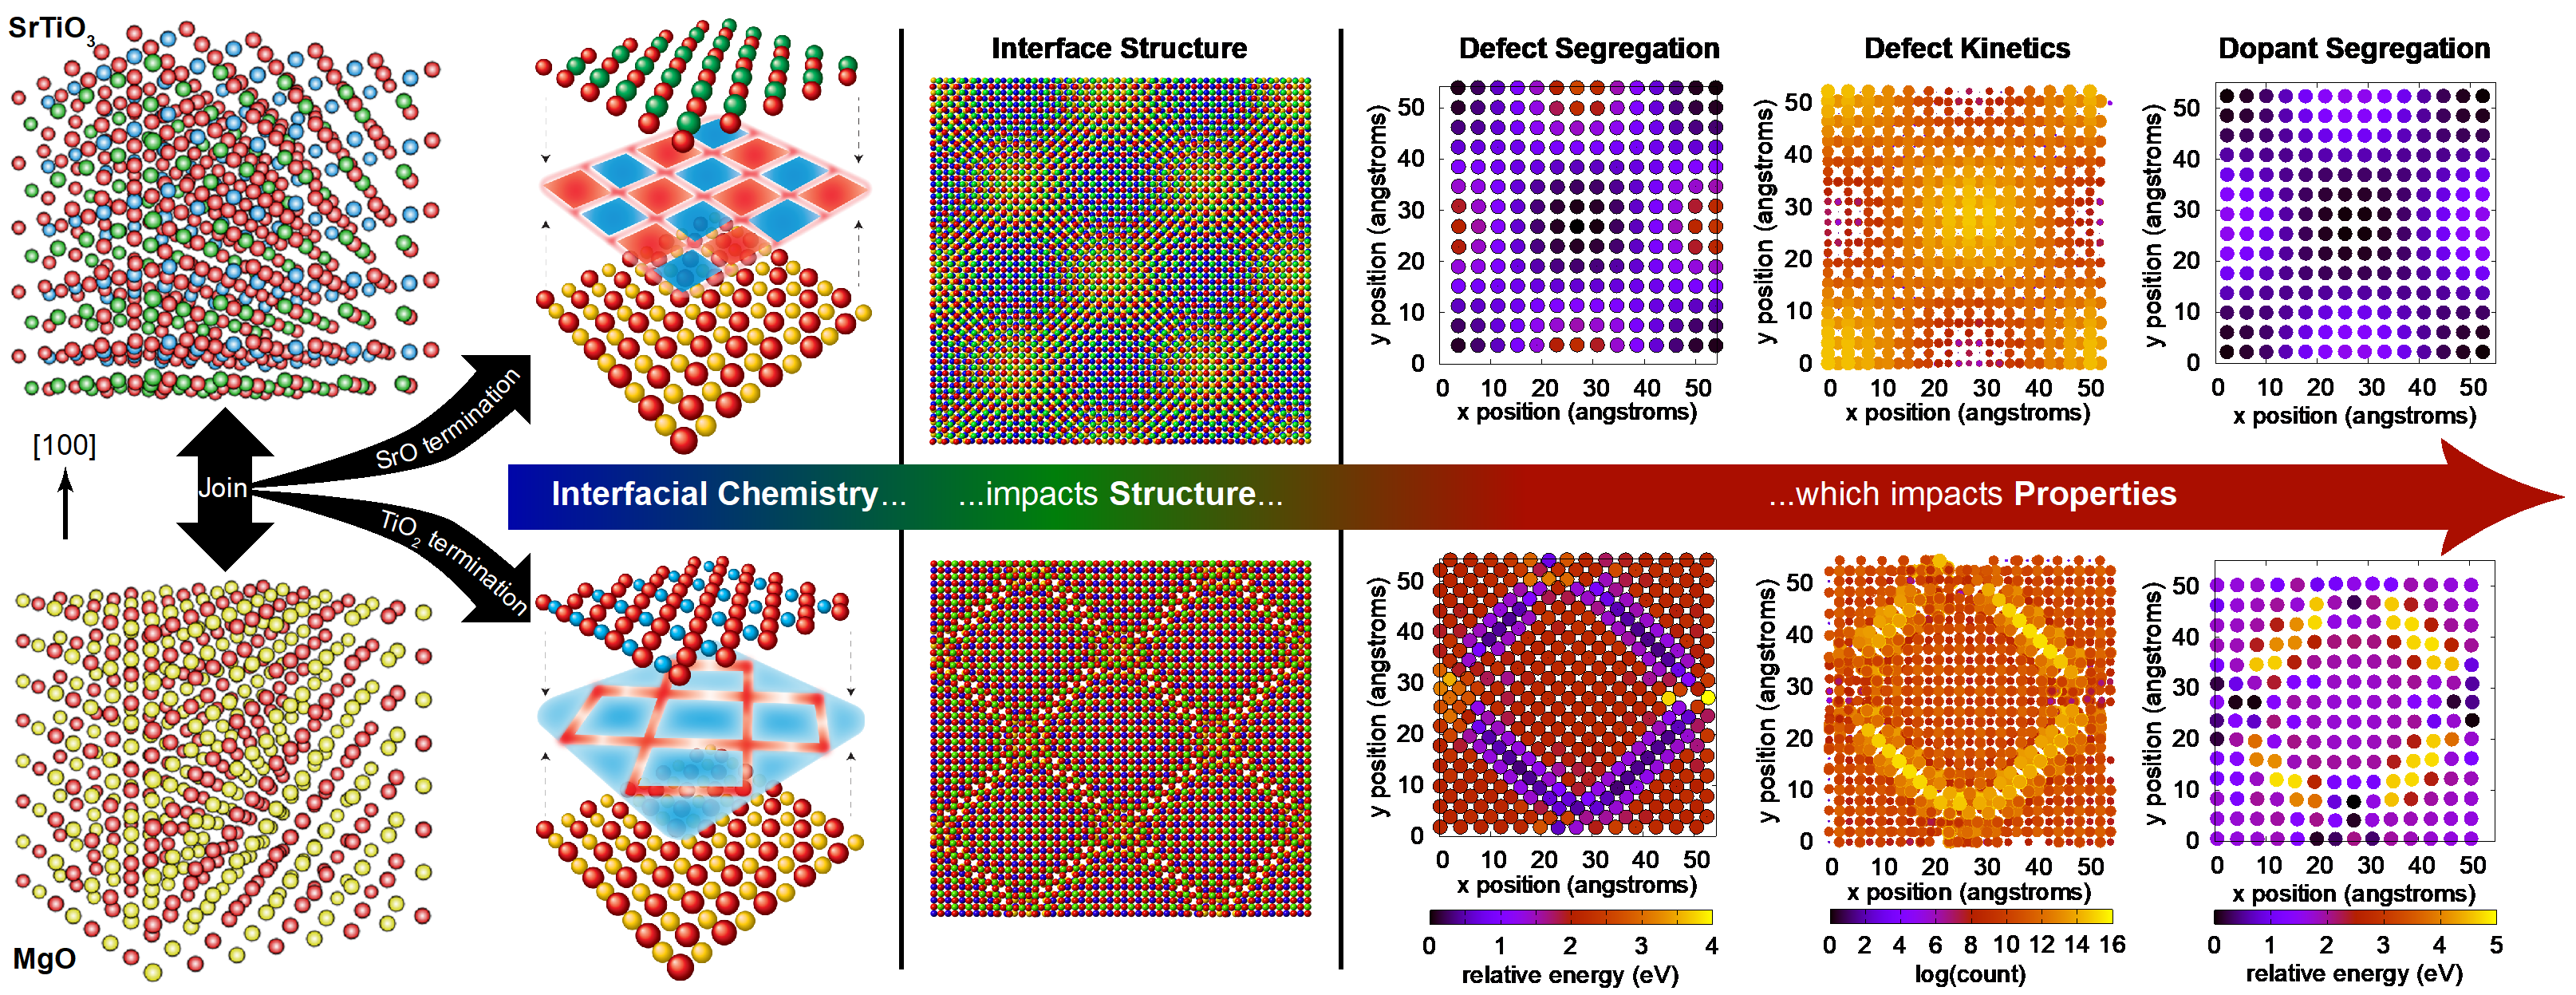 While only limited theoretical work has been done to examine the structure and properties of these interfaces, that work highlighted that misfit dislocation structures change fundamental properties at the interface, including the segregation of defects and dopants and mass transport at the interface.